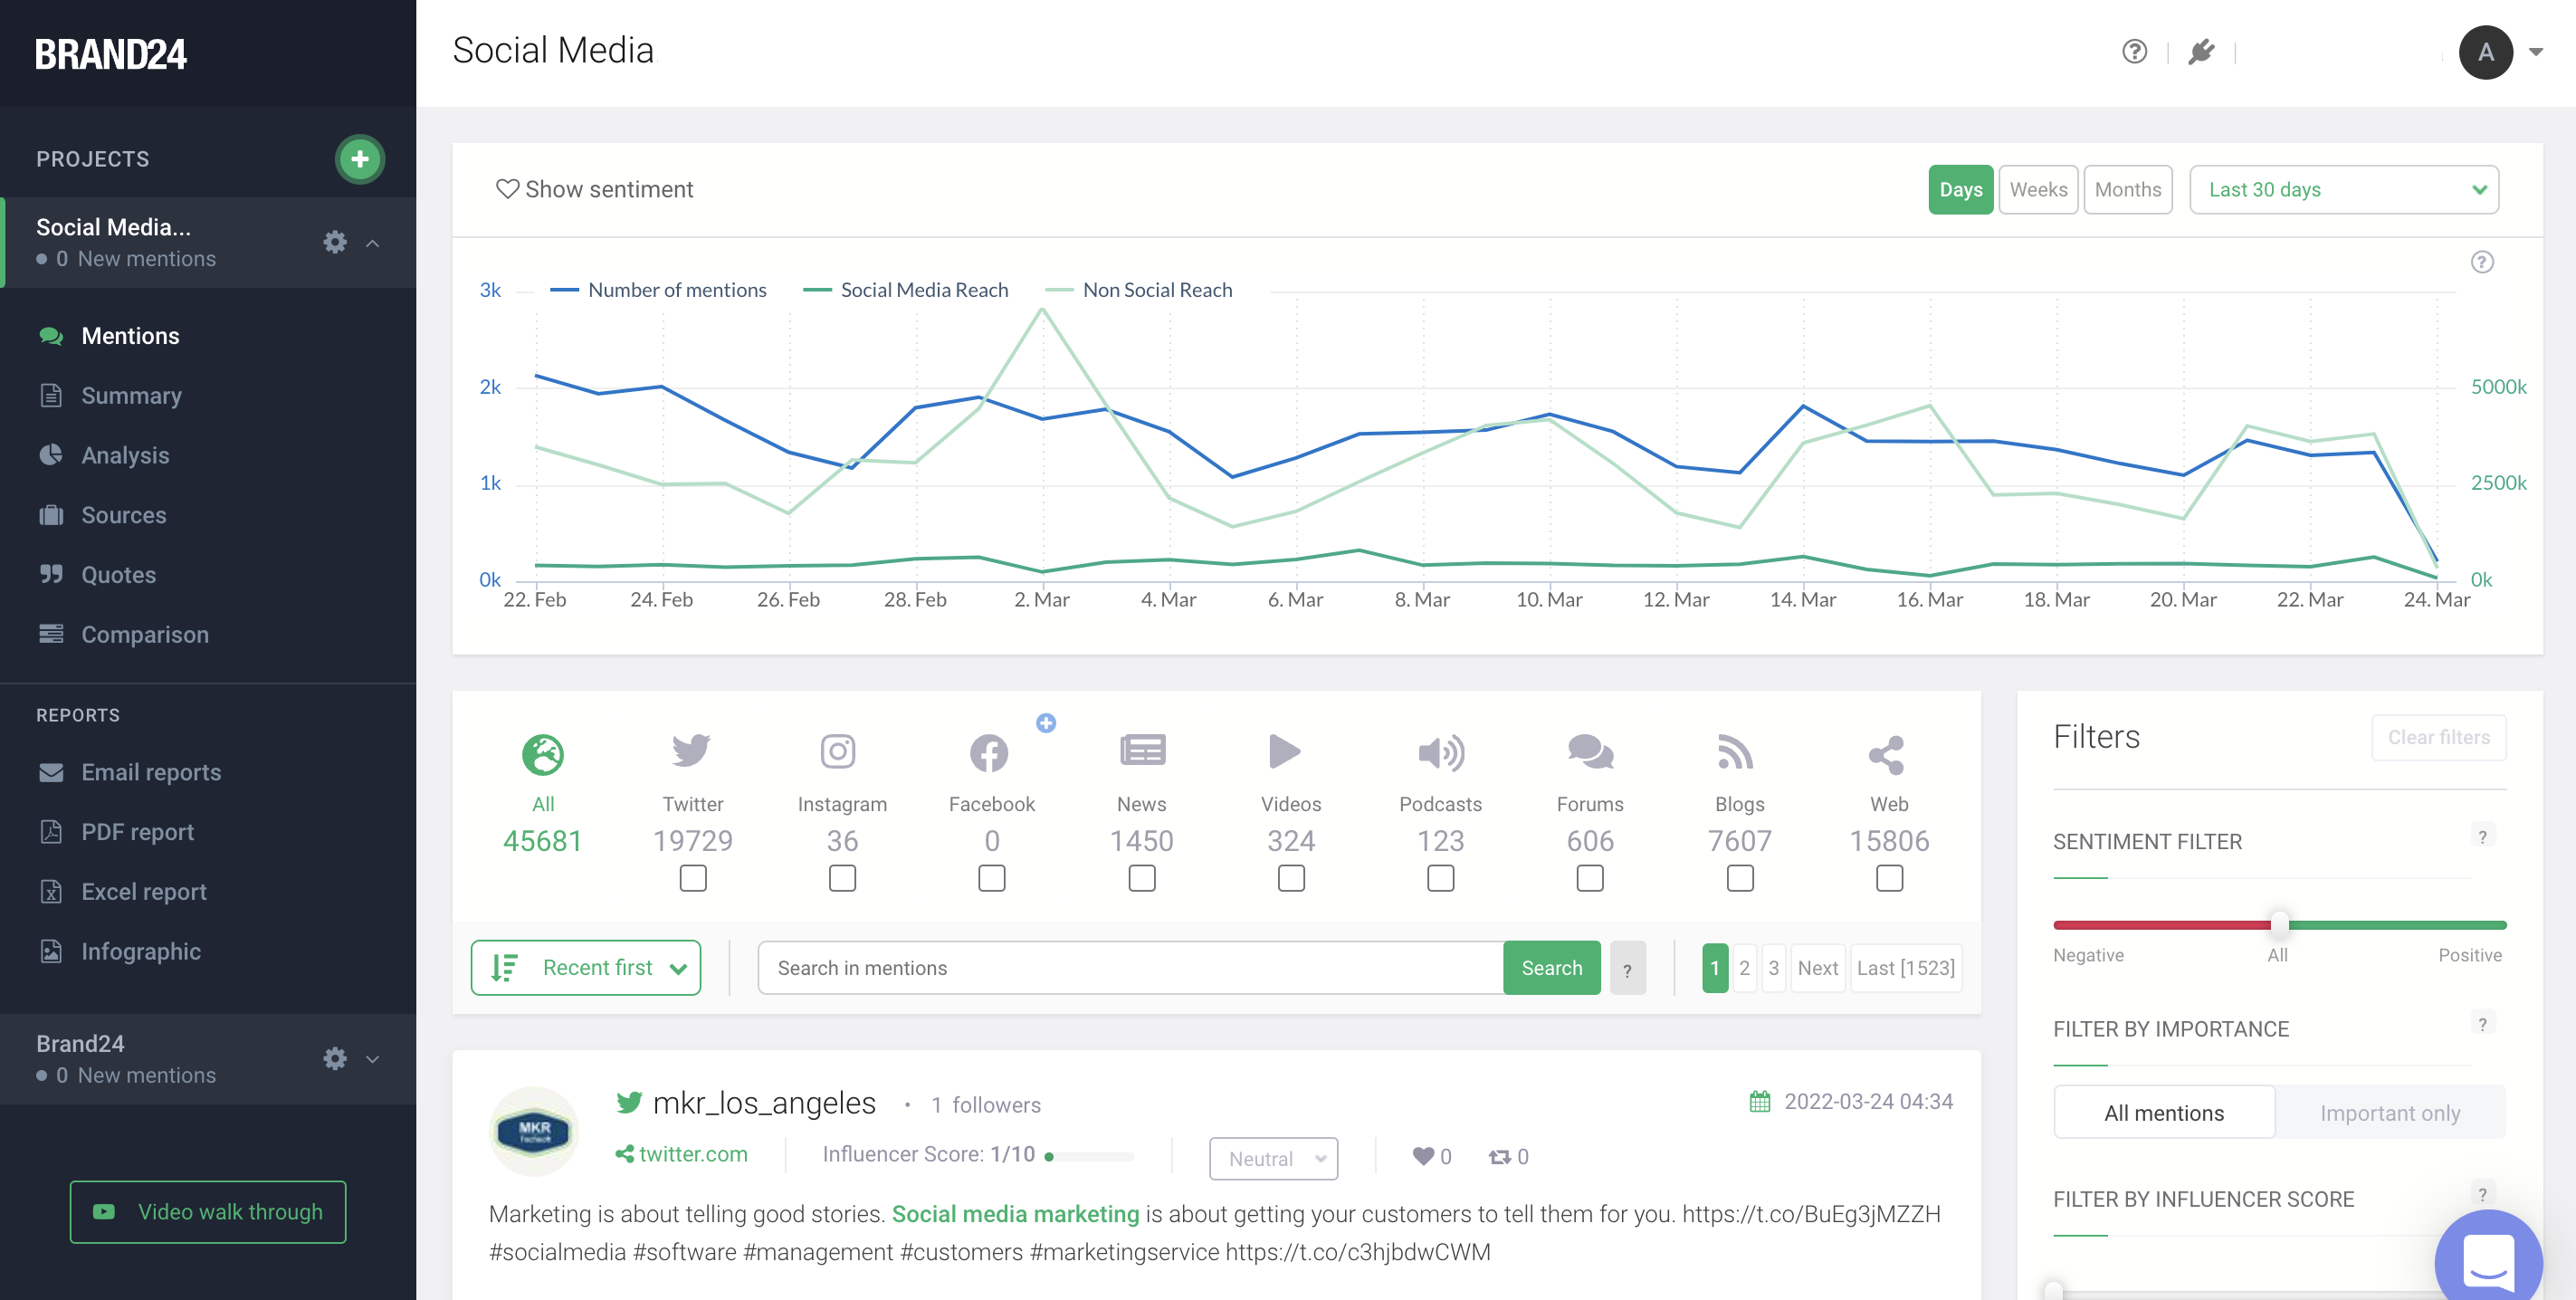 Identify and analyze online conversations about you and your brand, products, or services. Get a real-time overview in one dashboard!